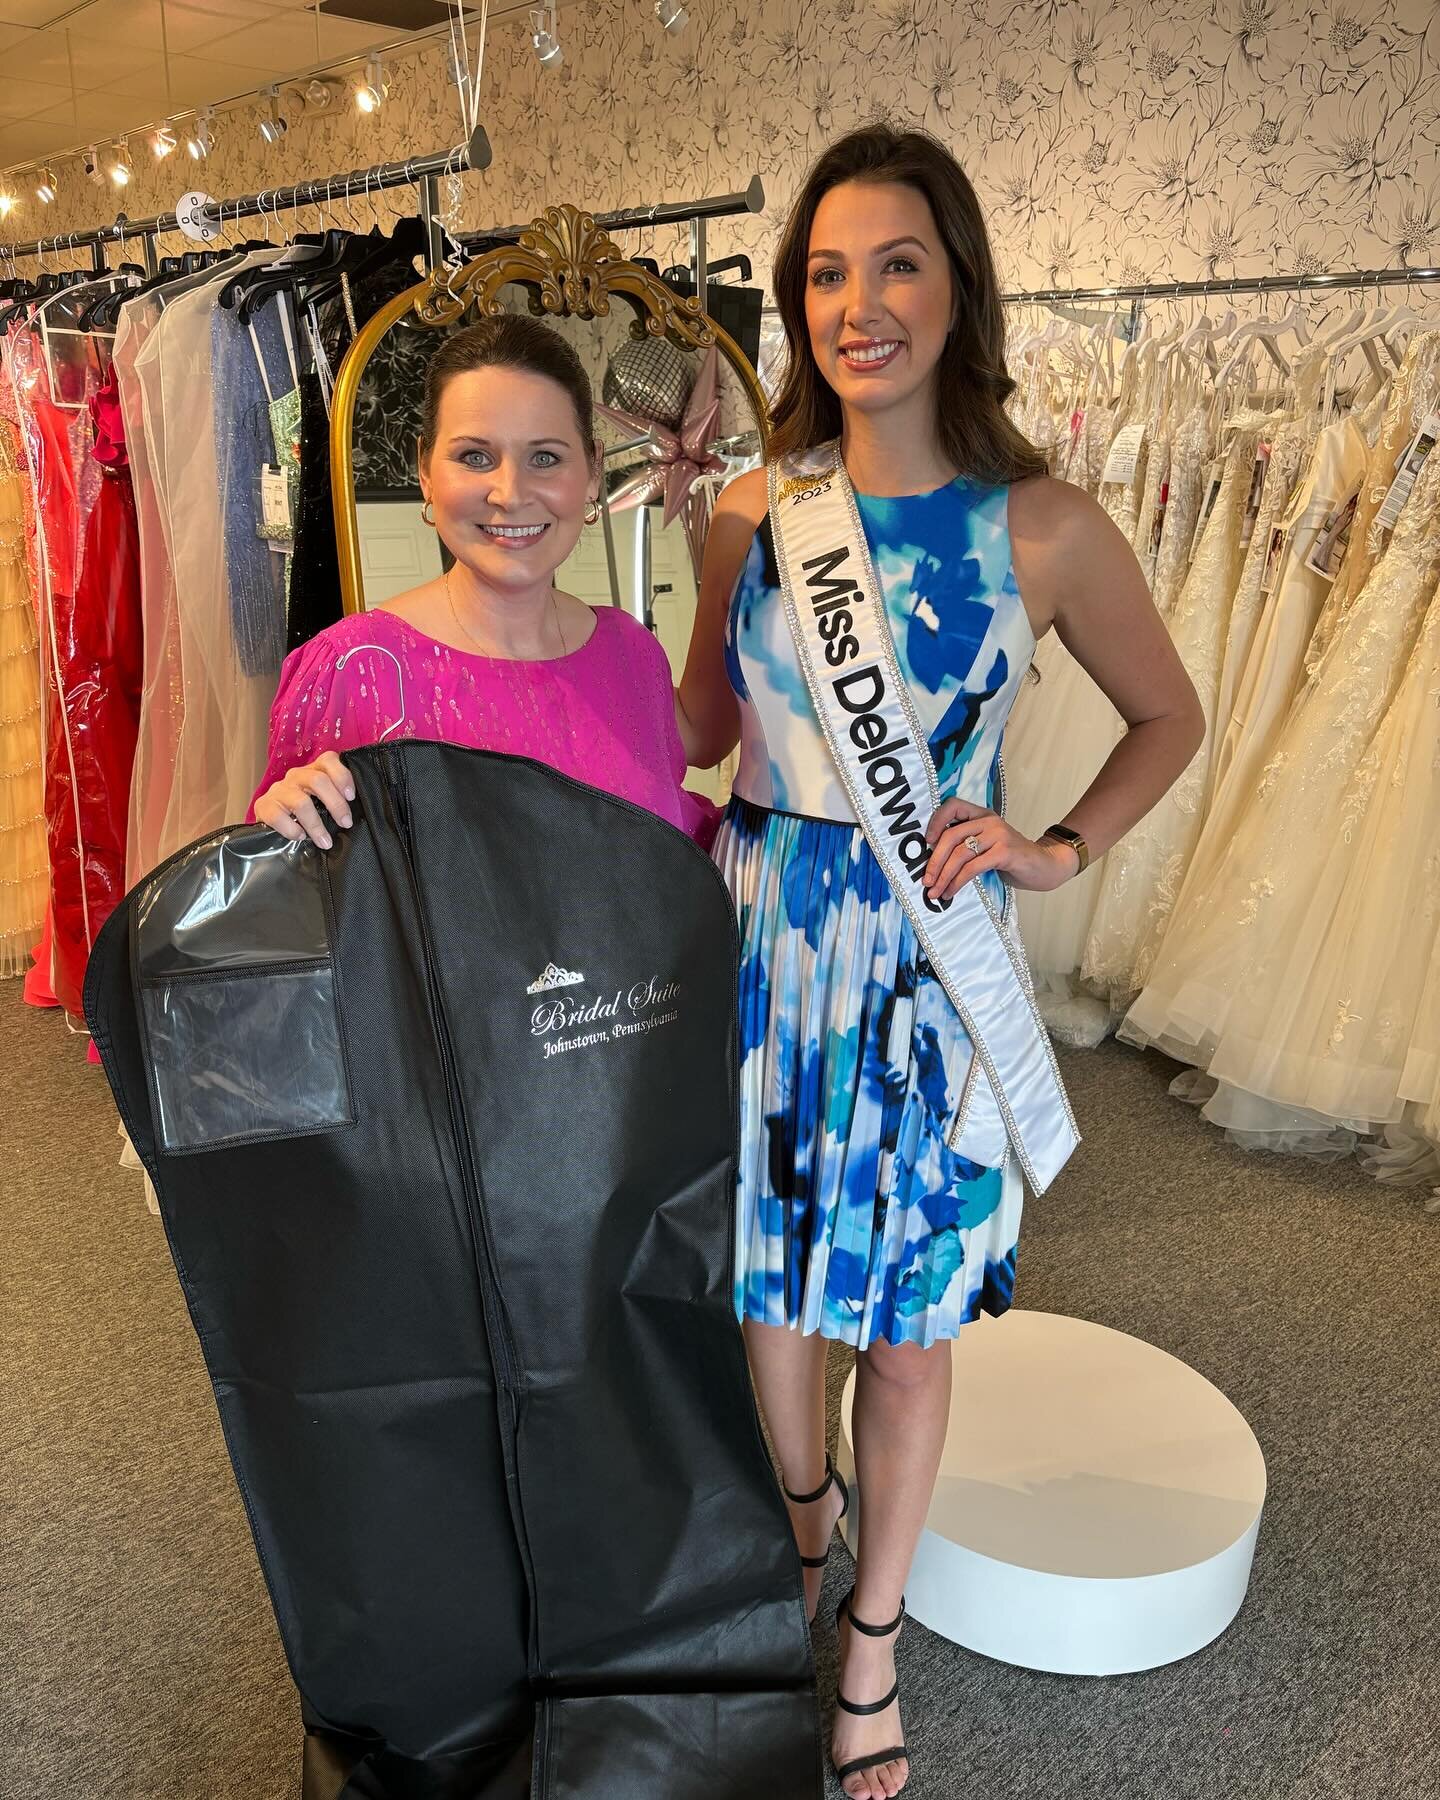 I had so much fun today with Ronnie at @bridal_suite picking out a dress to crown our next Miss Delaware 🥲🩷 Thank you so much for your generous sponsorship, for always welcoming the @missdeorg into your store, and for your kind words 🥹

I was also